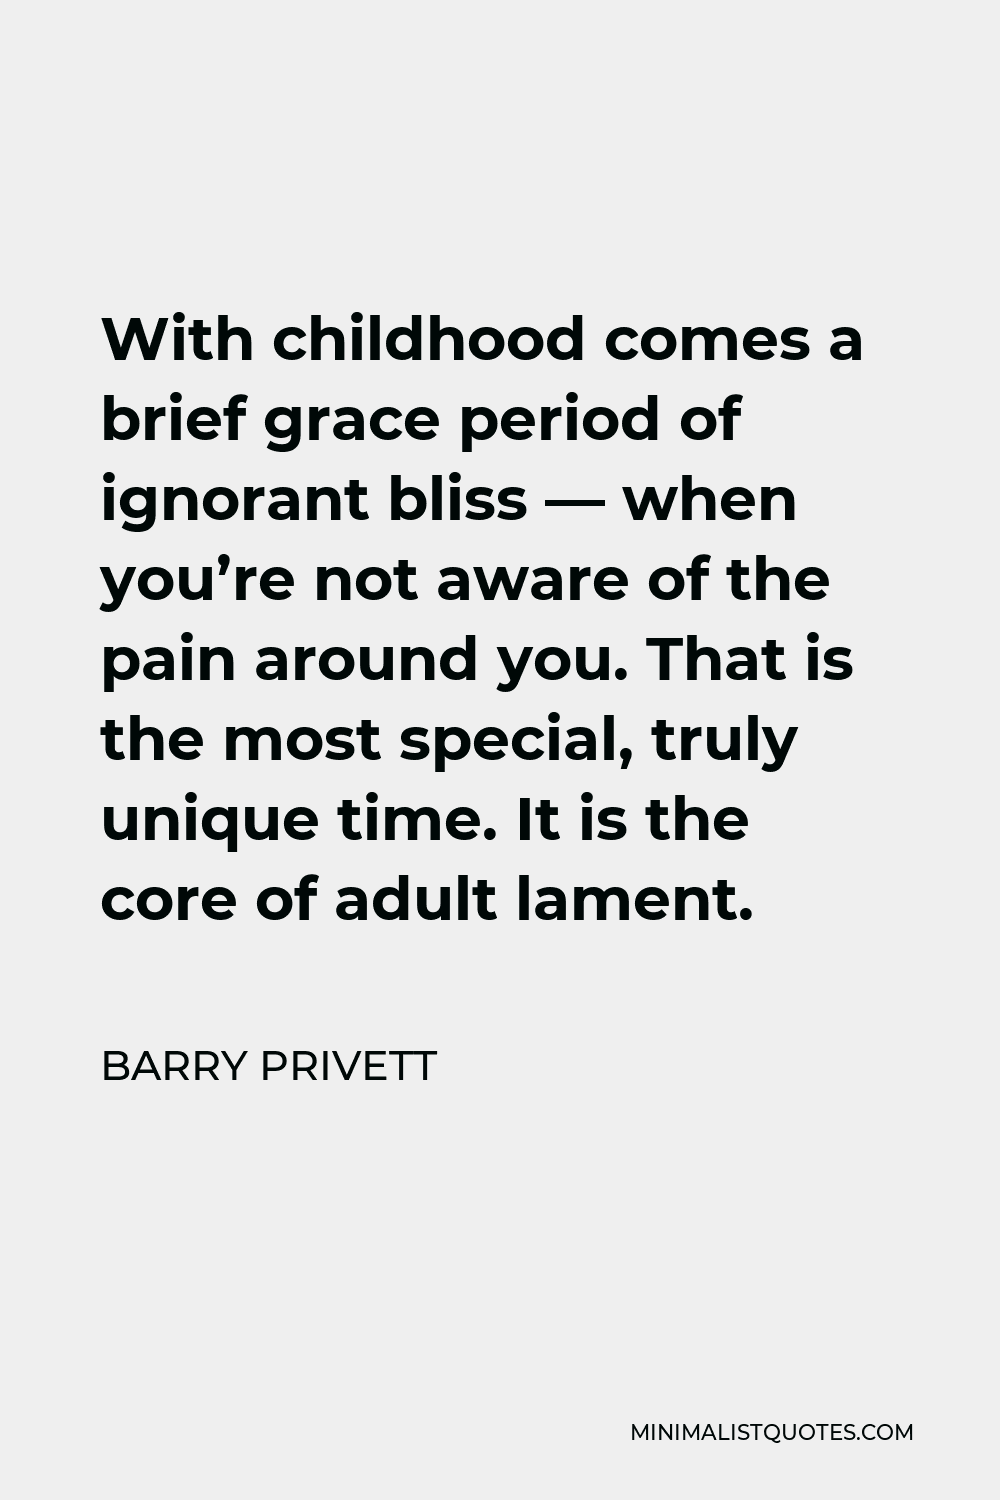 Barry Privett Quote - With childhood comes a brief grace period of ignorant bliss — when you’re not aware of the pain around you. That is the most special, truly unique time. It is the core of adult lament.